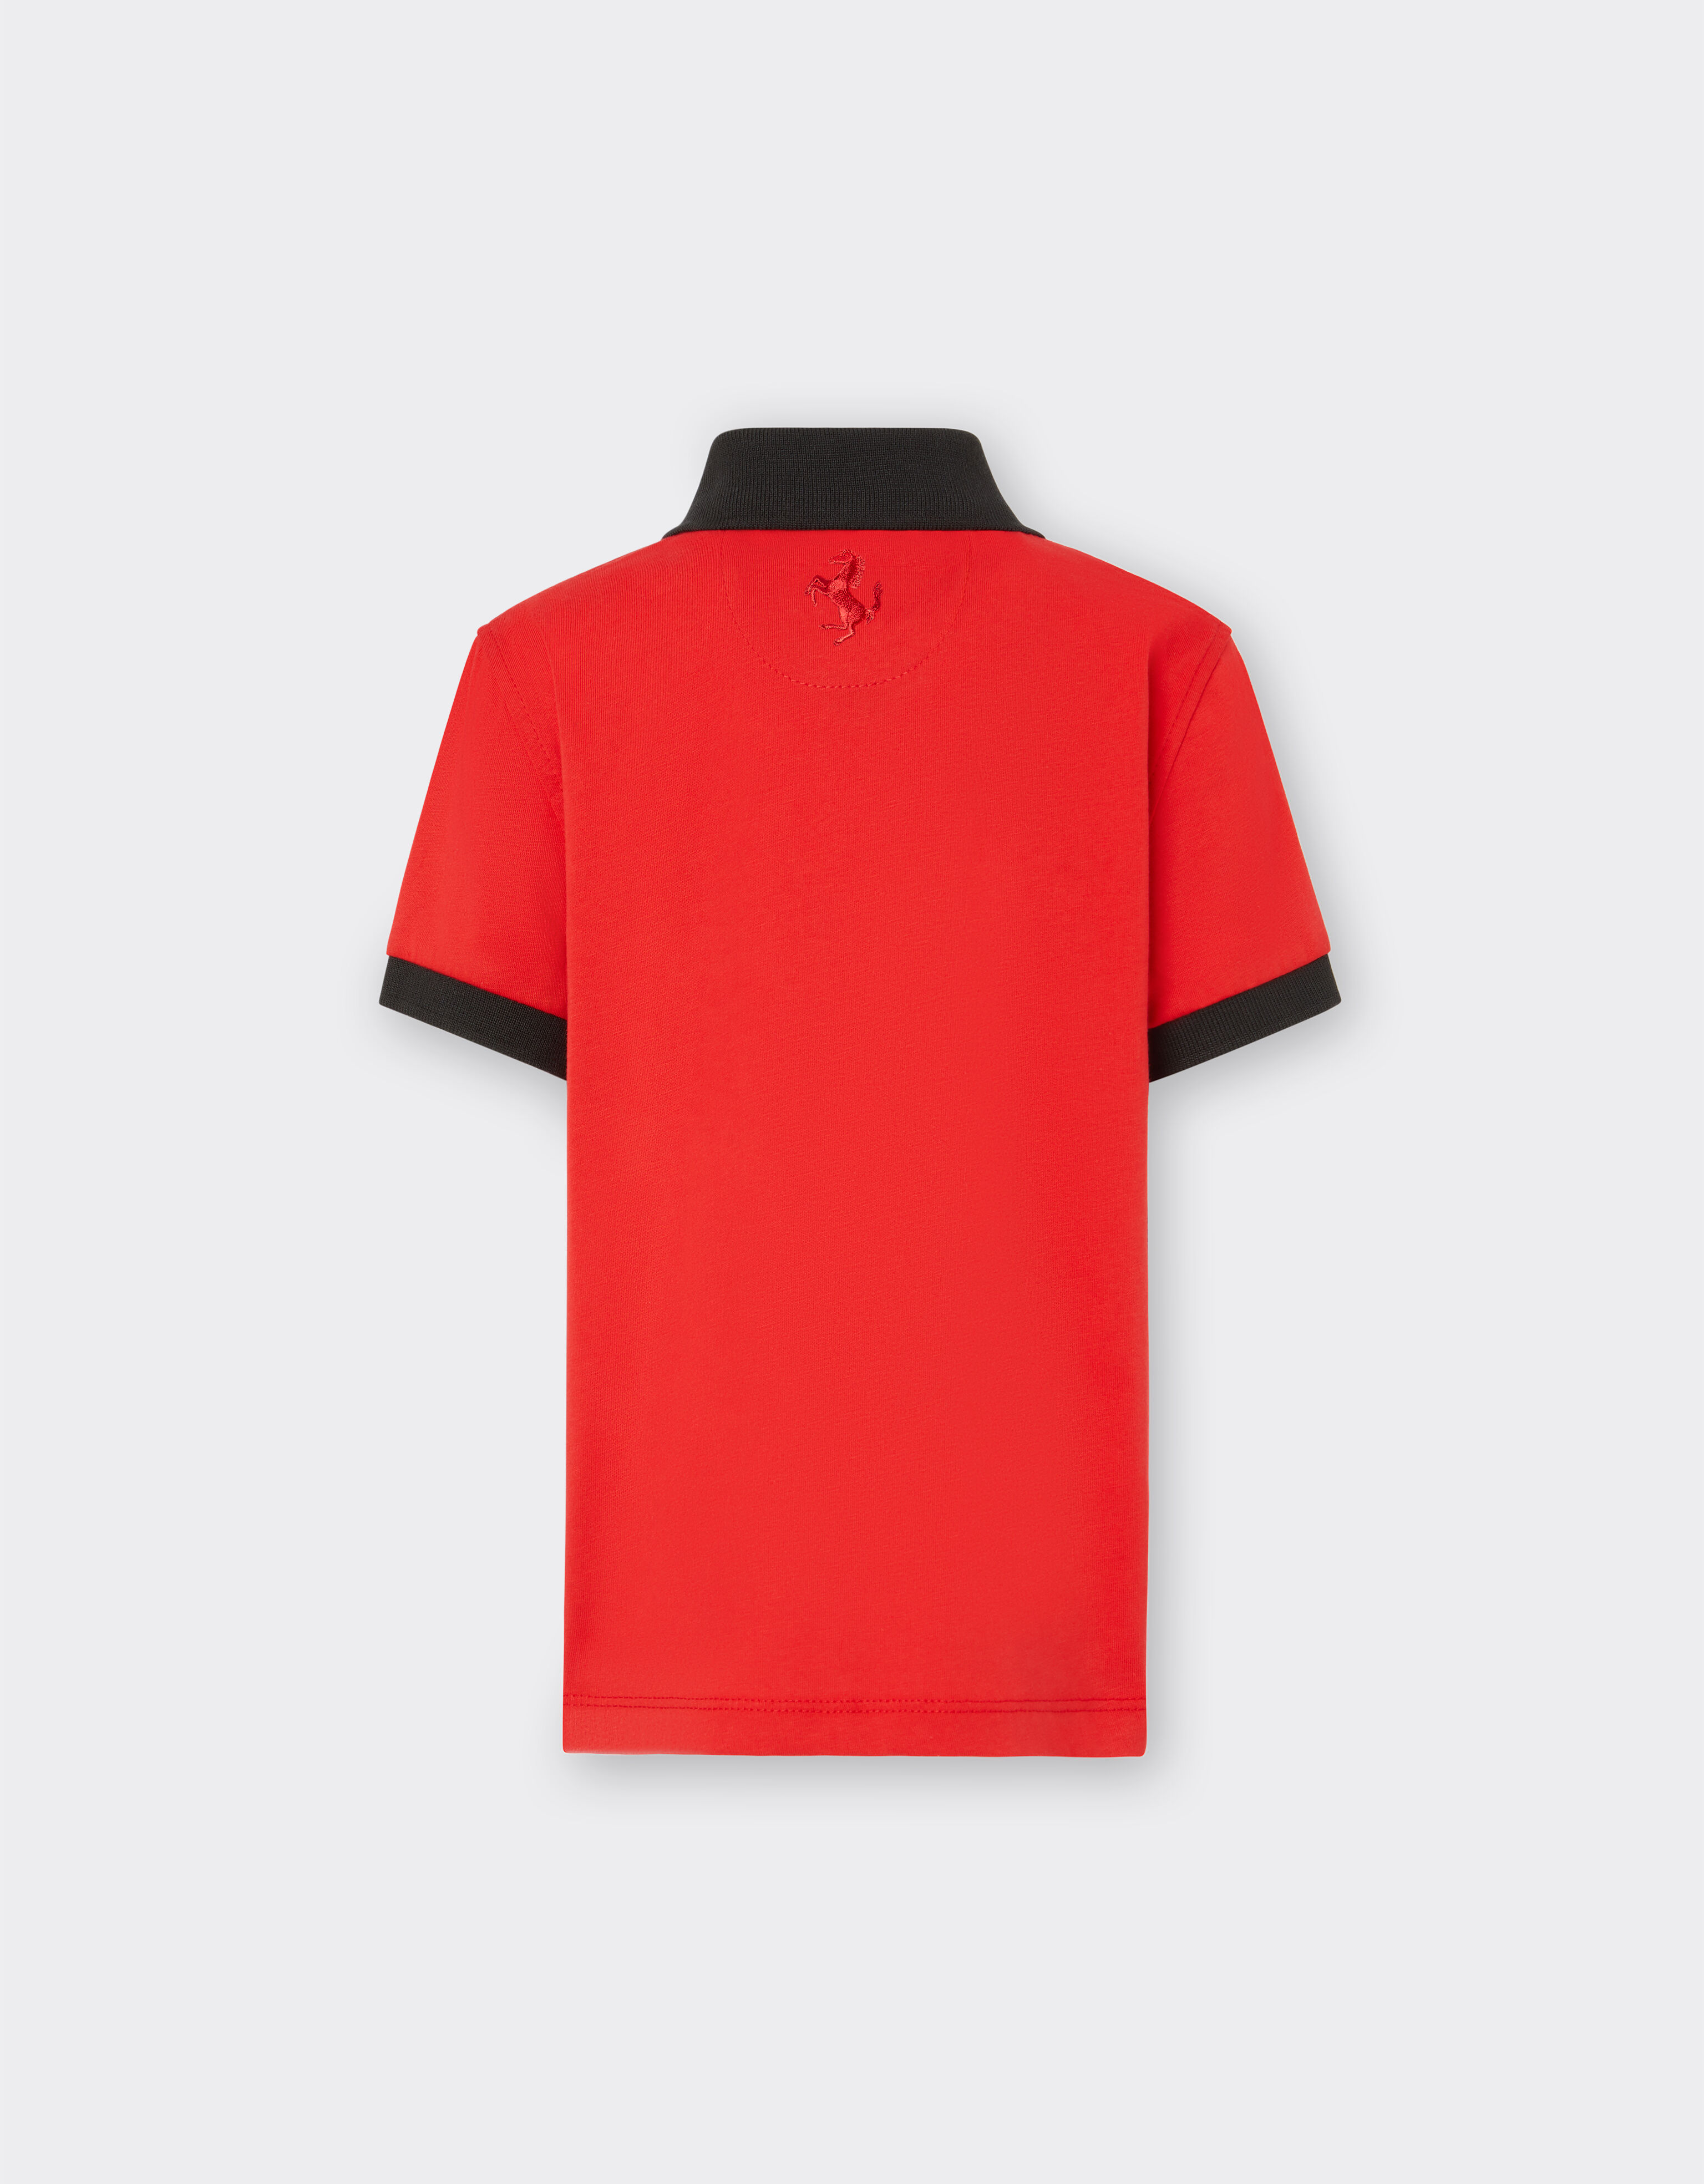 Ferrari Short sleeves -Contrast collar and cuffs - Front buttoning Rosso Corsa 红色 20160fK